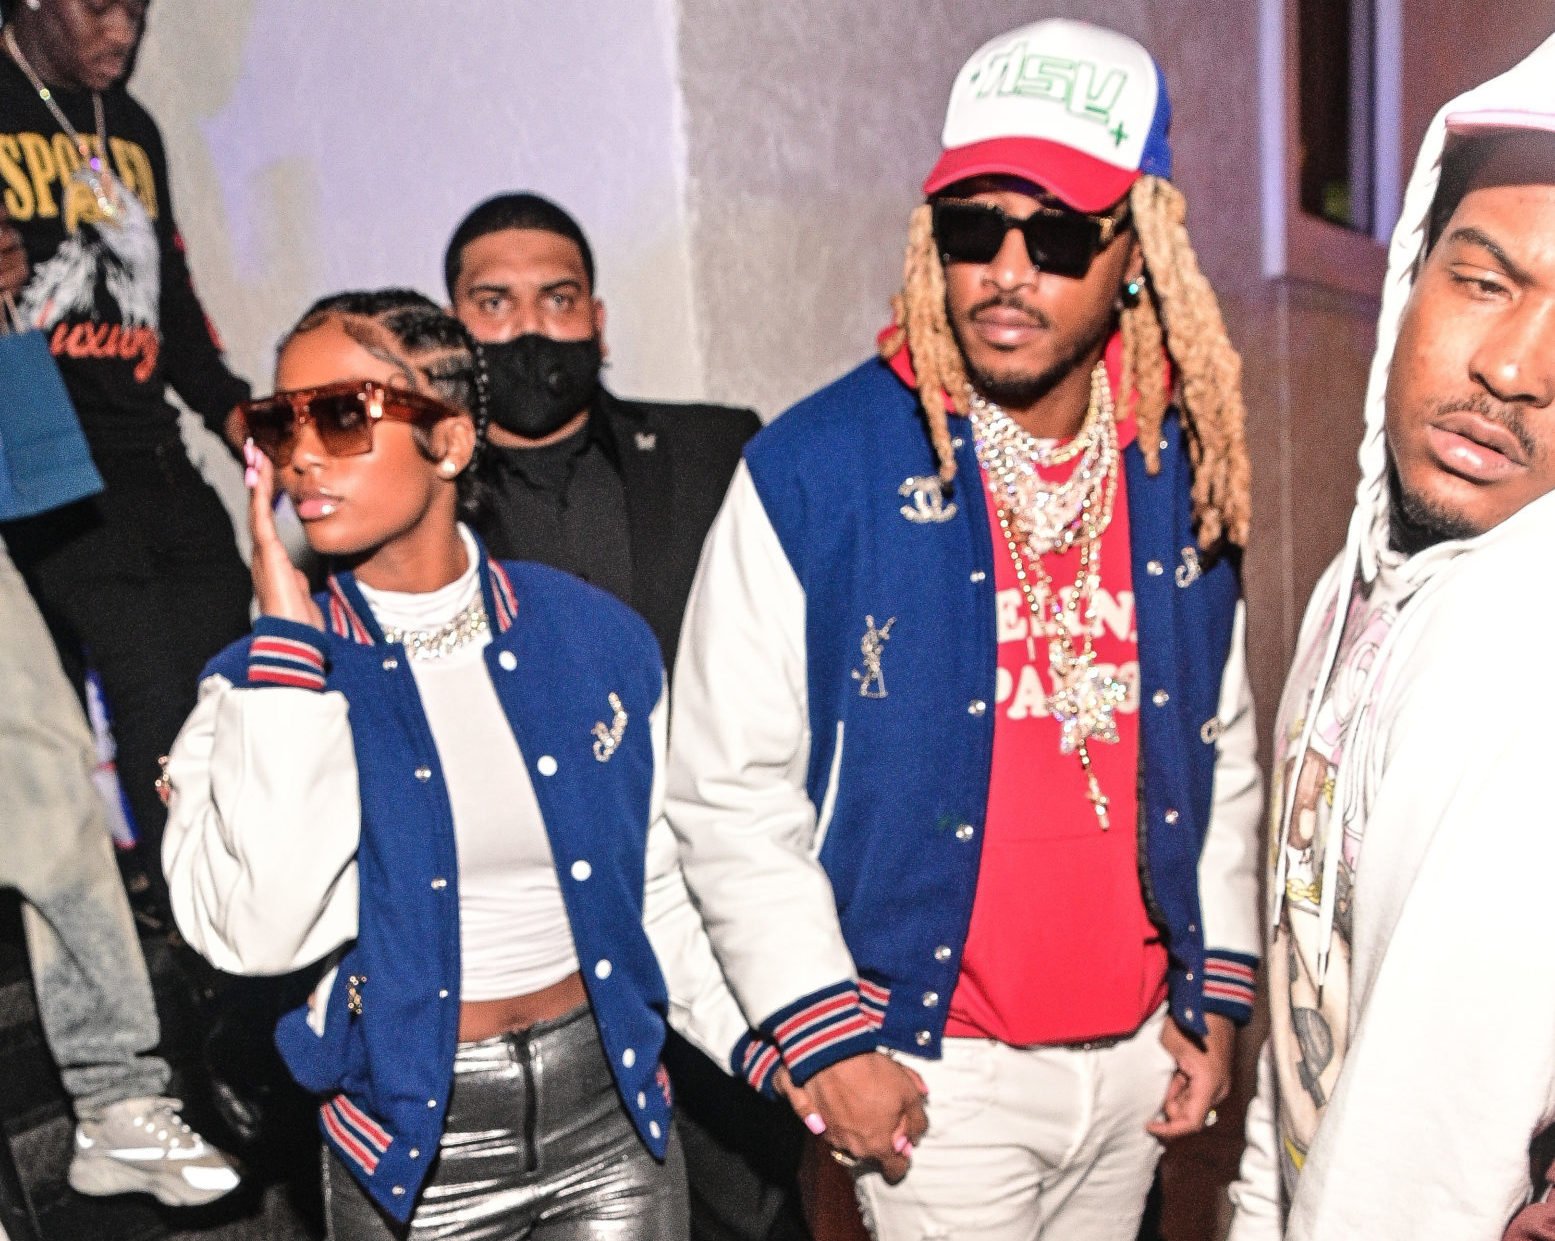 Future And His Boo Dess Dior Step Out In Matching Varsity Jackets Amid Engagement Rumors (Pics)